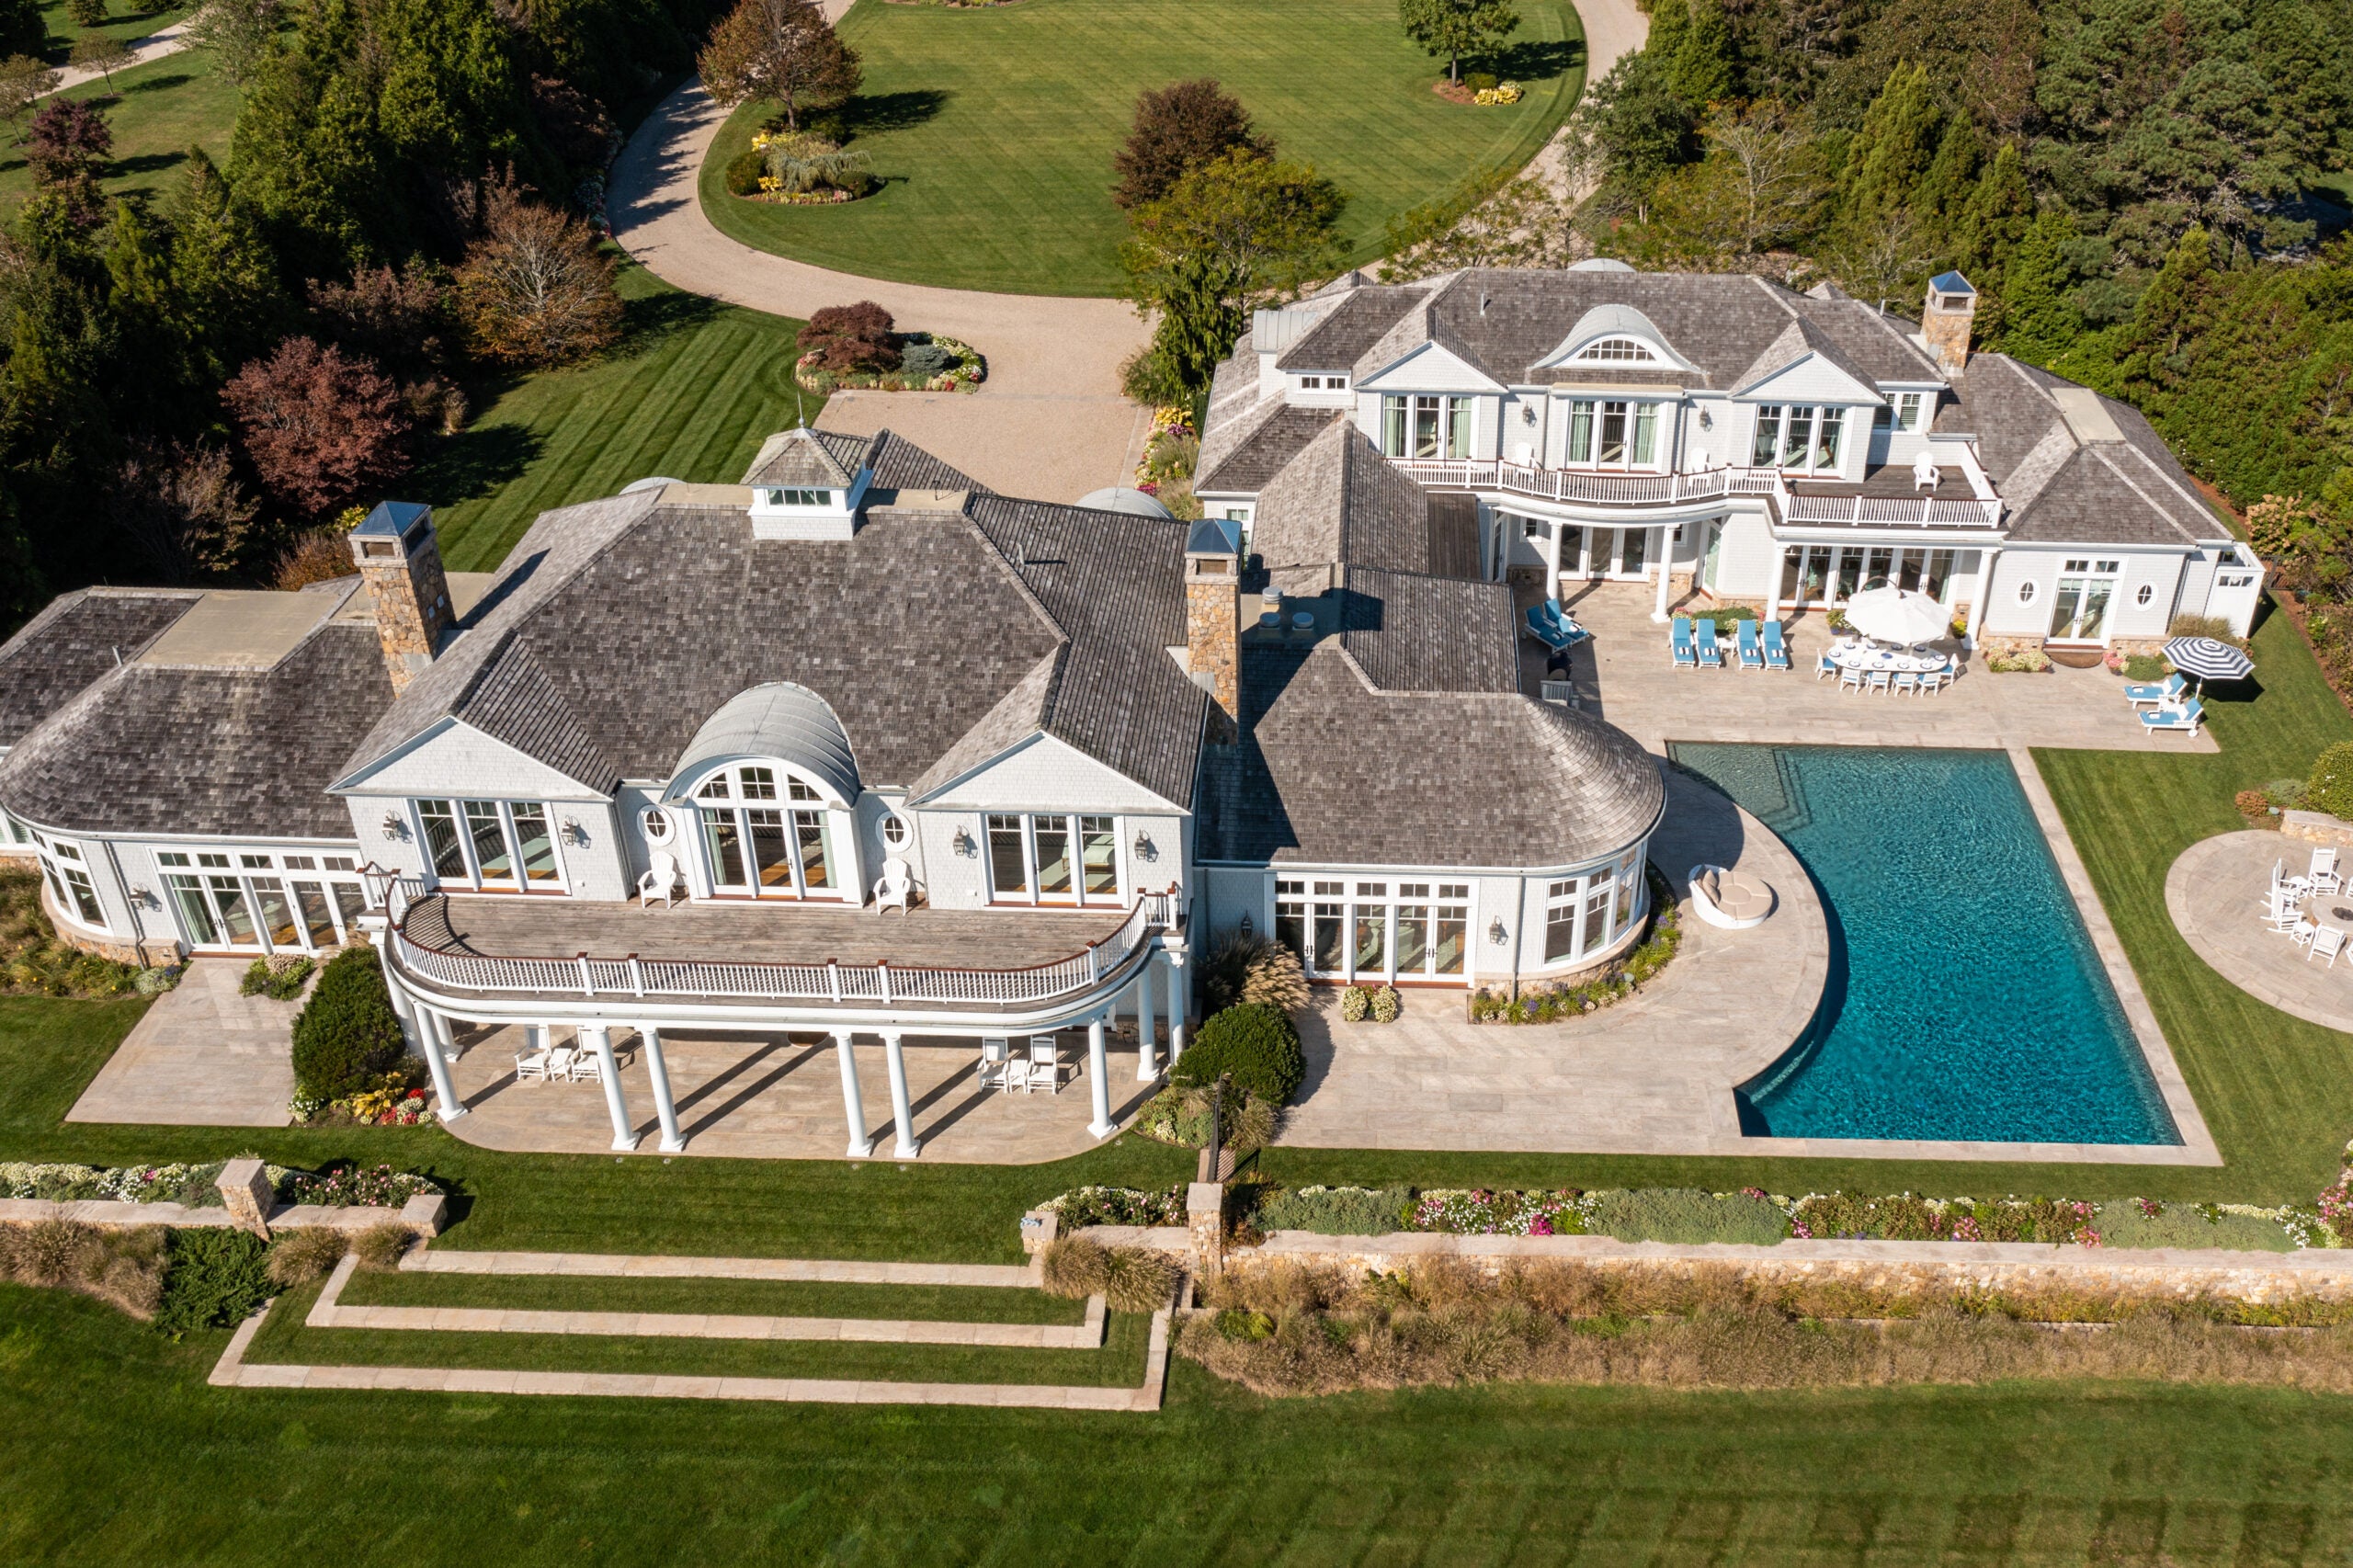 An aerial view of the property on sunny day.